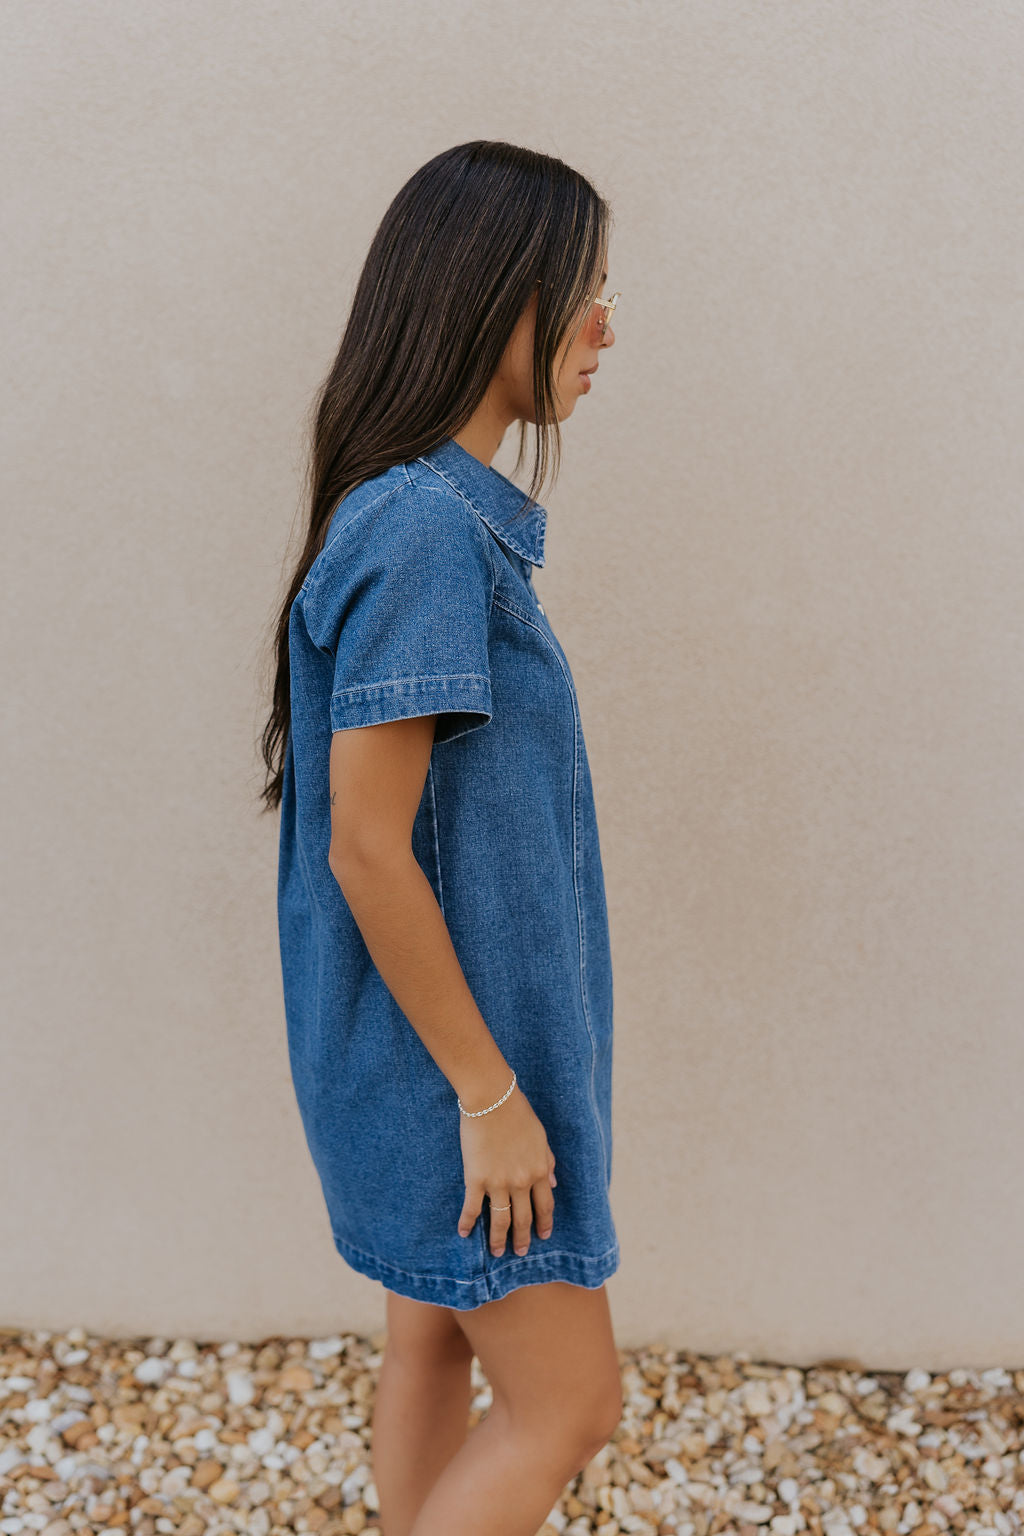 Right side view of model wearing the Jada Denim Short Sleeve Mini Dress that has dark wash denim fabric, a zippered neckline with a collar, and short sleeves.